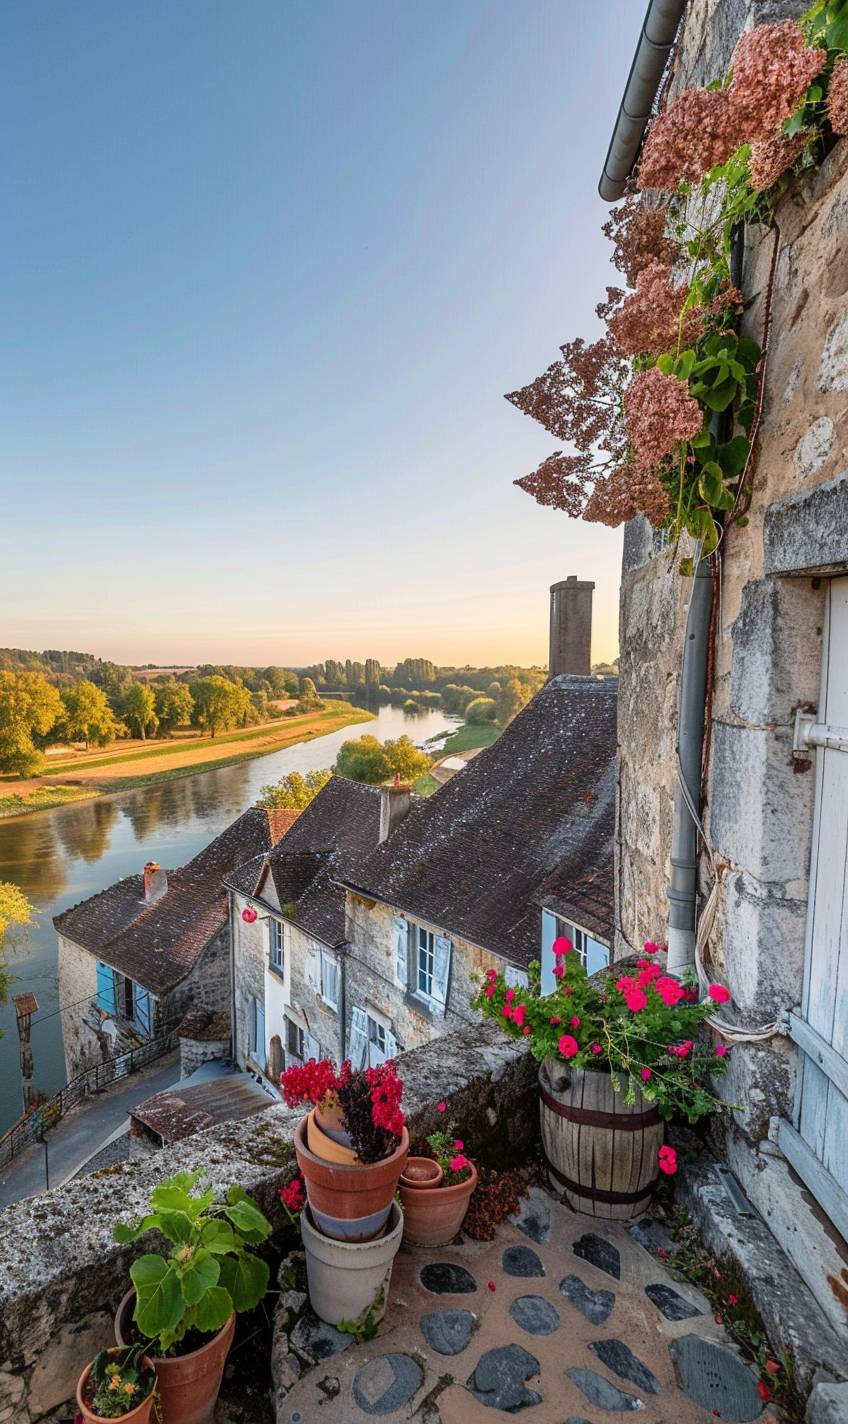 a lifestyle stock photography of The village of Candes-Saint-Martin in Indre-et-Loire: A hidden gem with its charm. Quaint stone houses with colorful flower pots, overlooking the river. Golden hour, clear blue sky, and a gentle breeze. Wide-angle shot, capturing the village's picturesque streets and the stunning view of the Loire River. Warm, natural lighting, creating a romantic and inviting atmosphere.